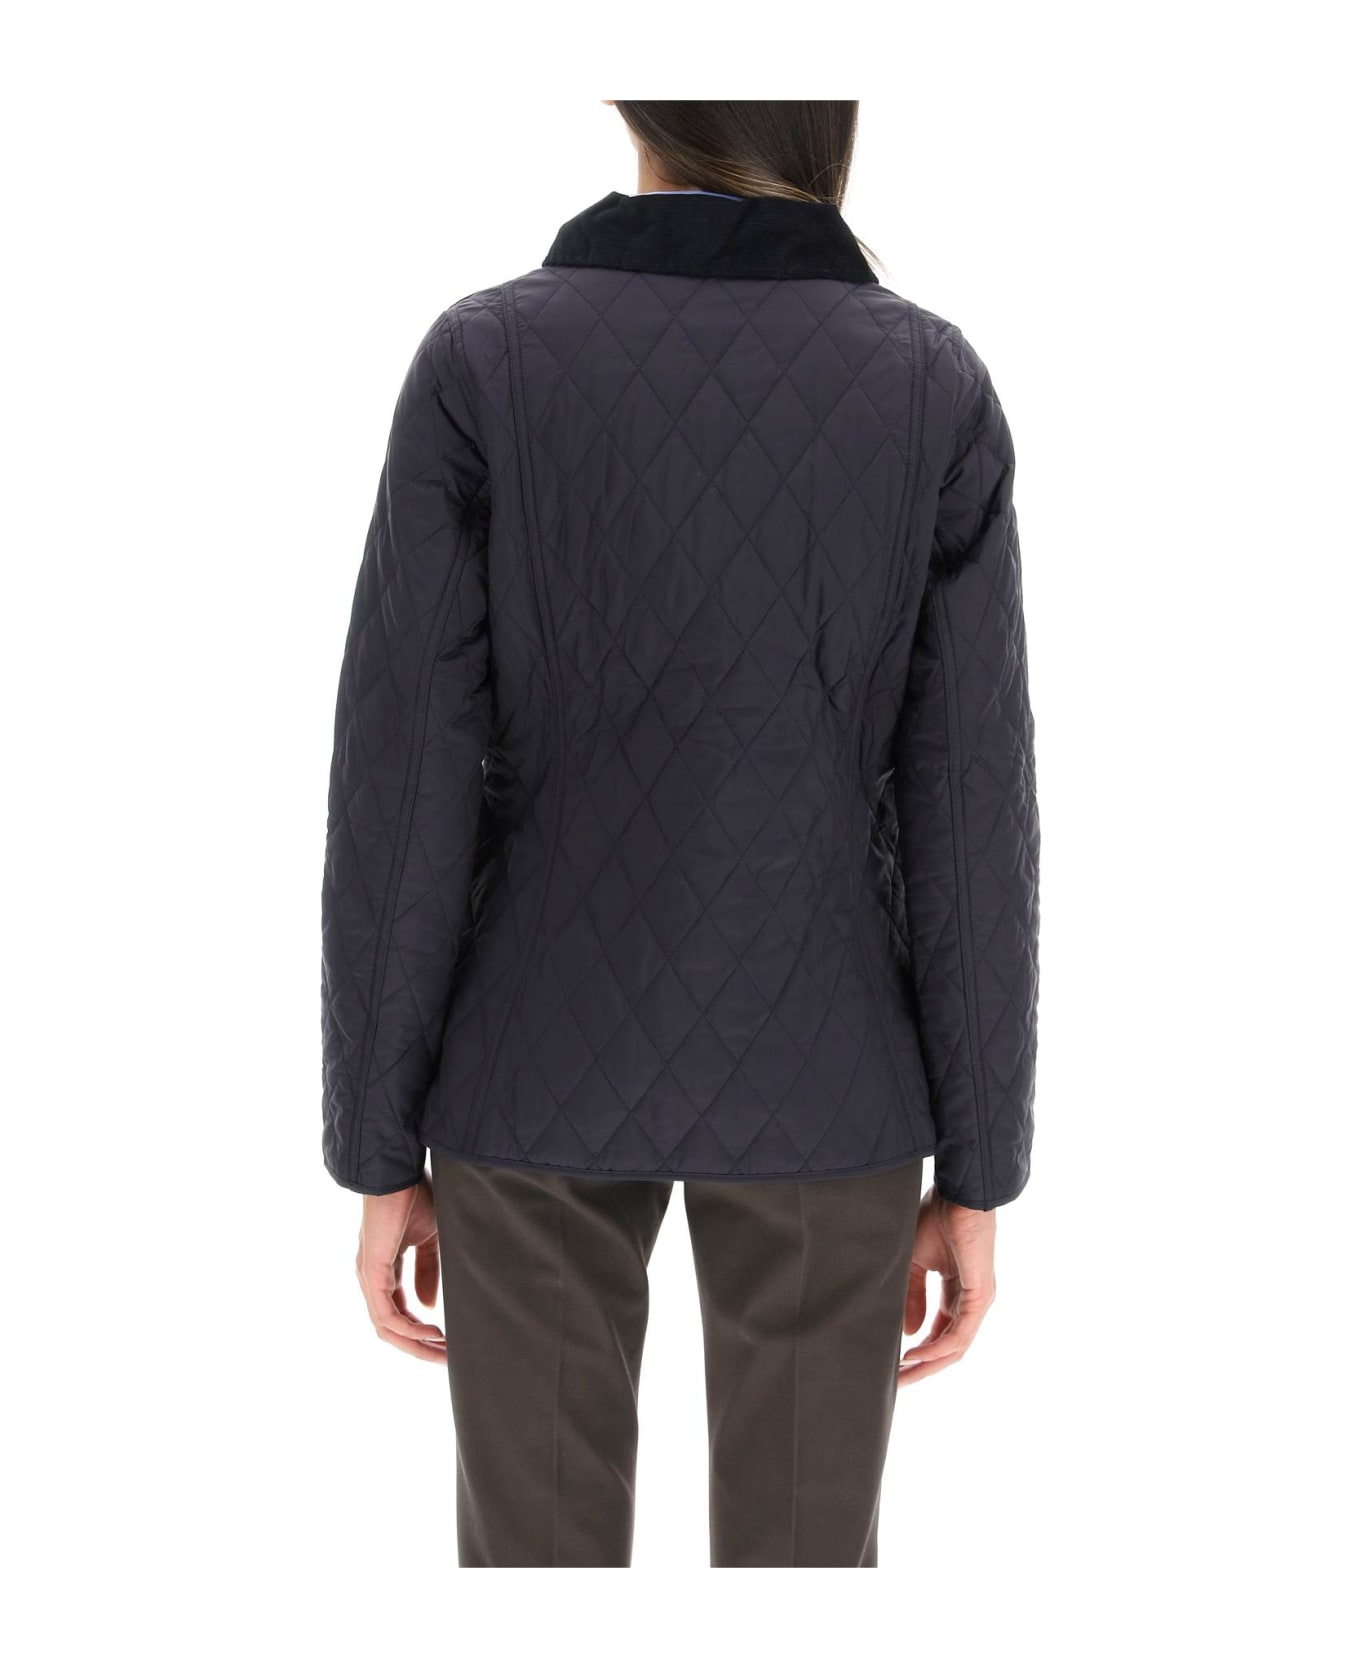 Barbour Annandale Diamond Quilted Jacket - NAVY (Blue) ジャケット